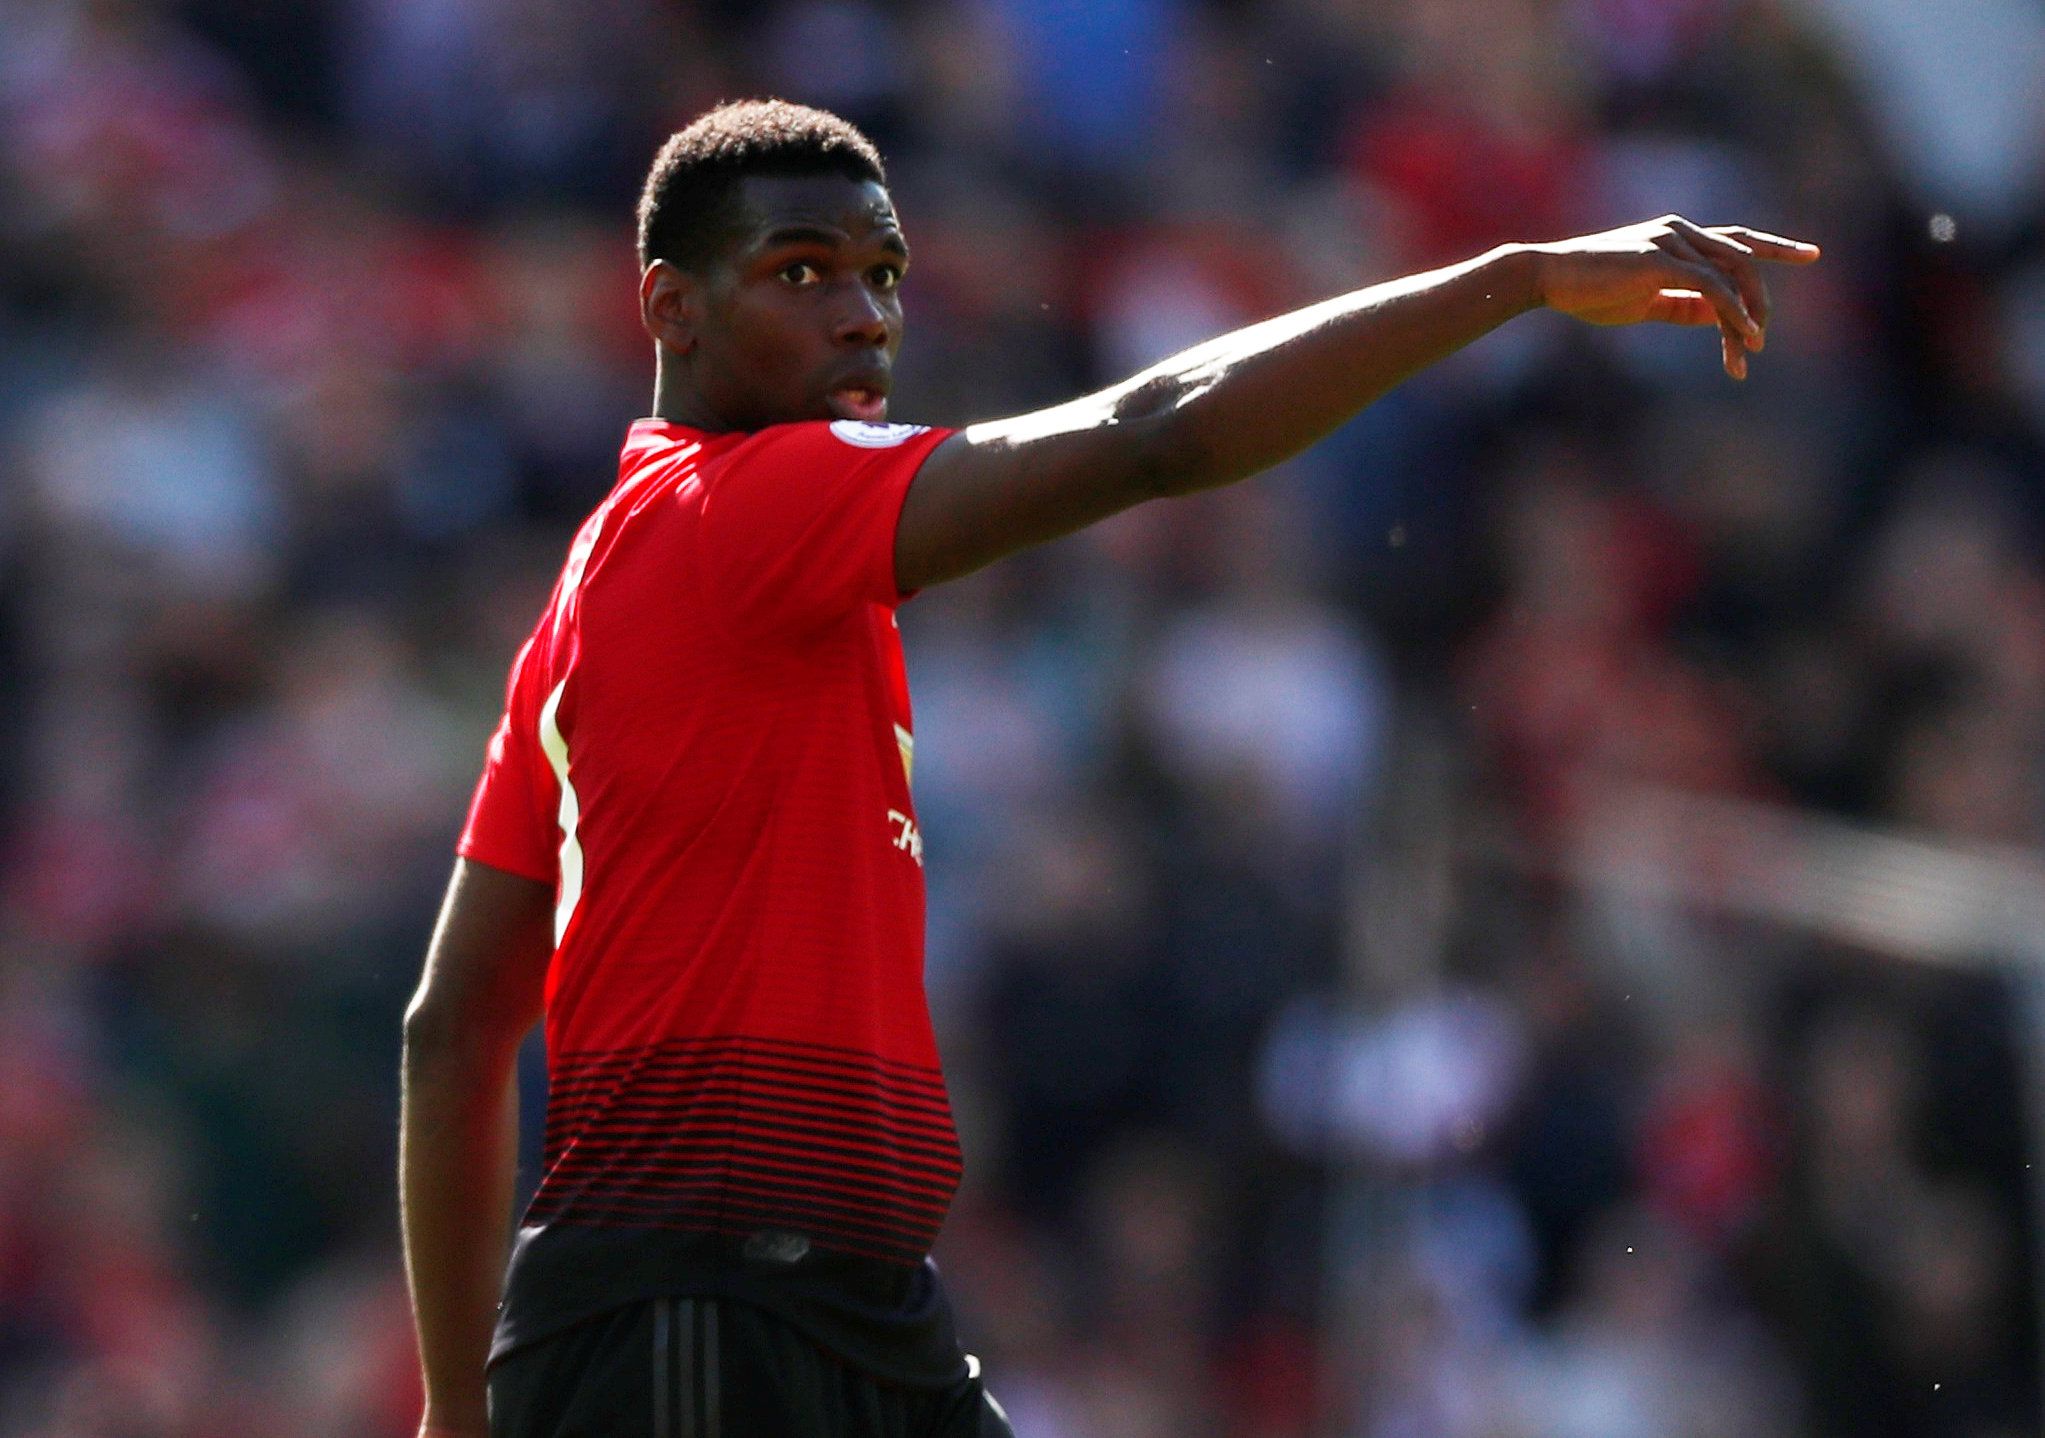 Soccer Football - Premier League - Manchester United v Cardiff City - Old Trafford, Manchester, Britain - May 12, 2019  Manchester United's Paul Pogba gestures          Action Images via Reuters/Lee Smith  EDITORIAL USE ONLY. No use with unauthorized audio, video, data, fixture lists, club/league logos or 